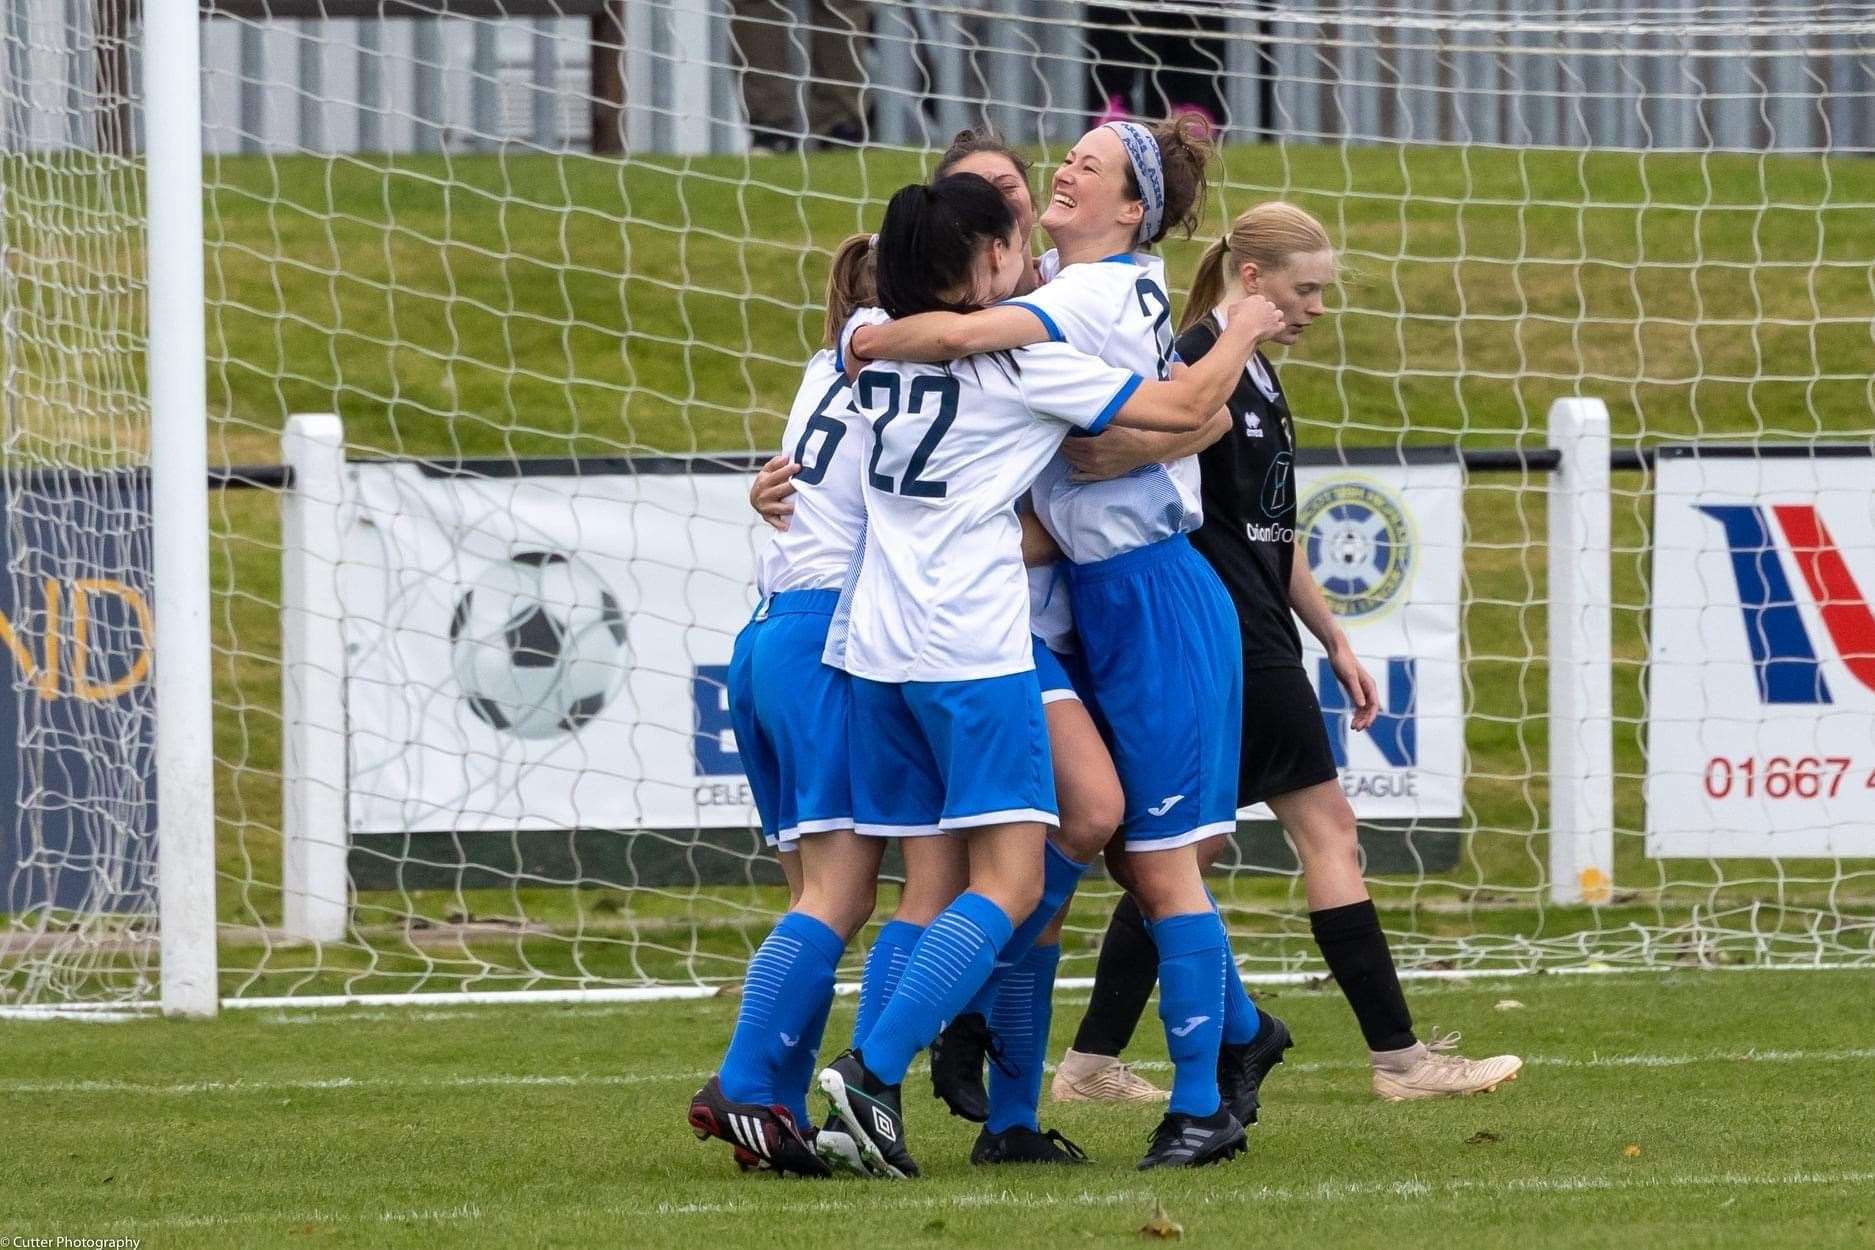 Franci (right) celebrates with her teammates during a Sutherland Women's FC game.